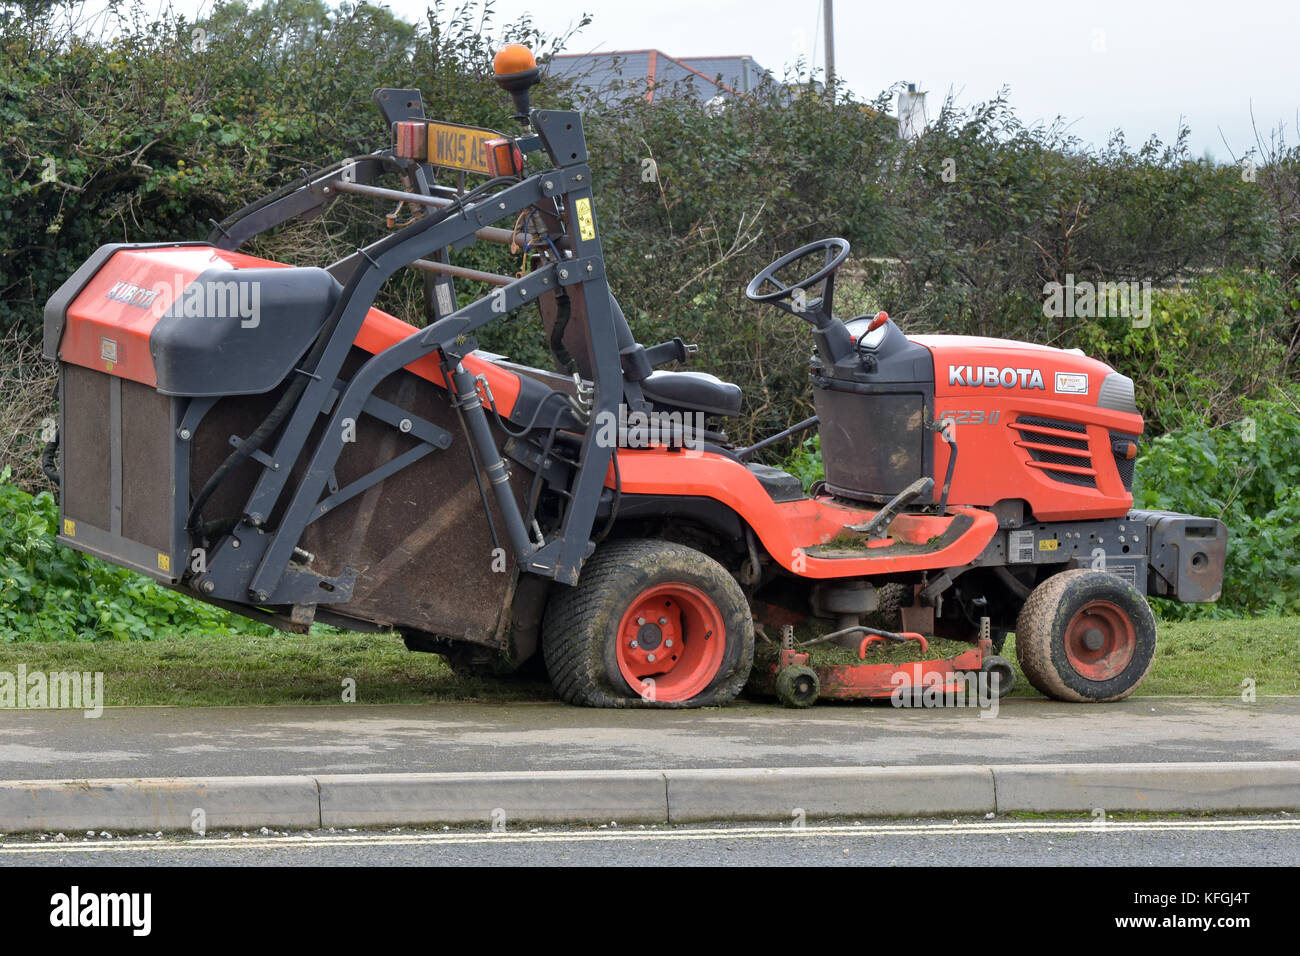 A large industrial ride-on lawnmower in orange colour parked at the side of the road on a verge with a flat tyre unable to move or mow the grass. Stock Photo